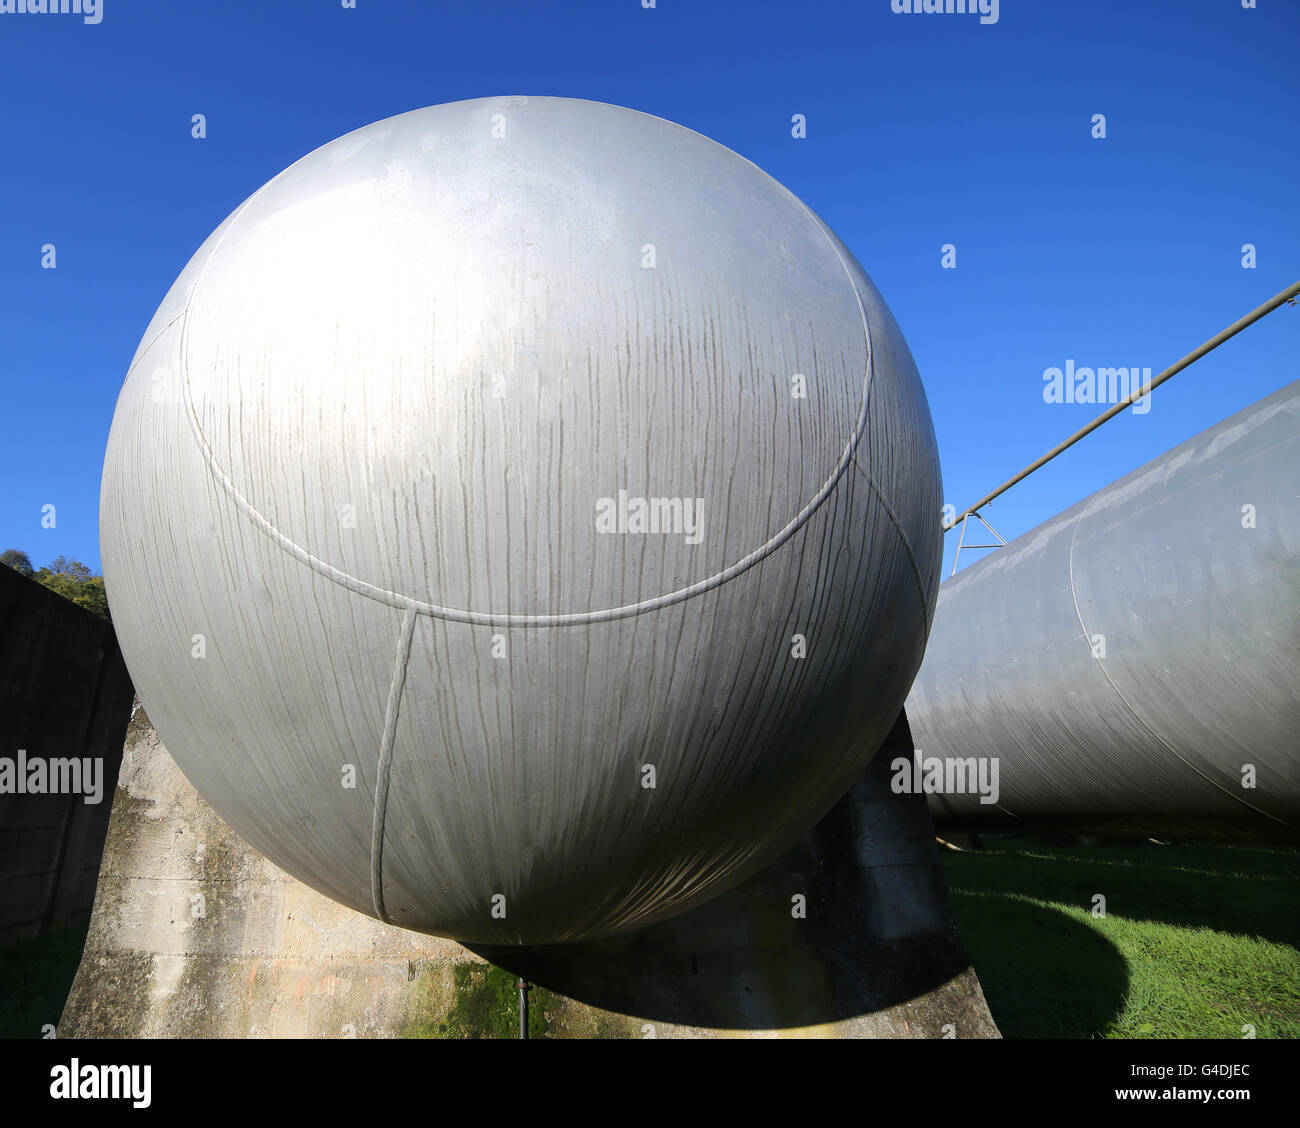 giant gas tank for the storage of flammable propane gas in the fuel production refinery Stock Photo